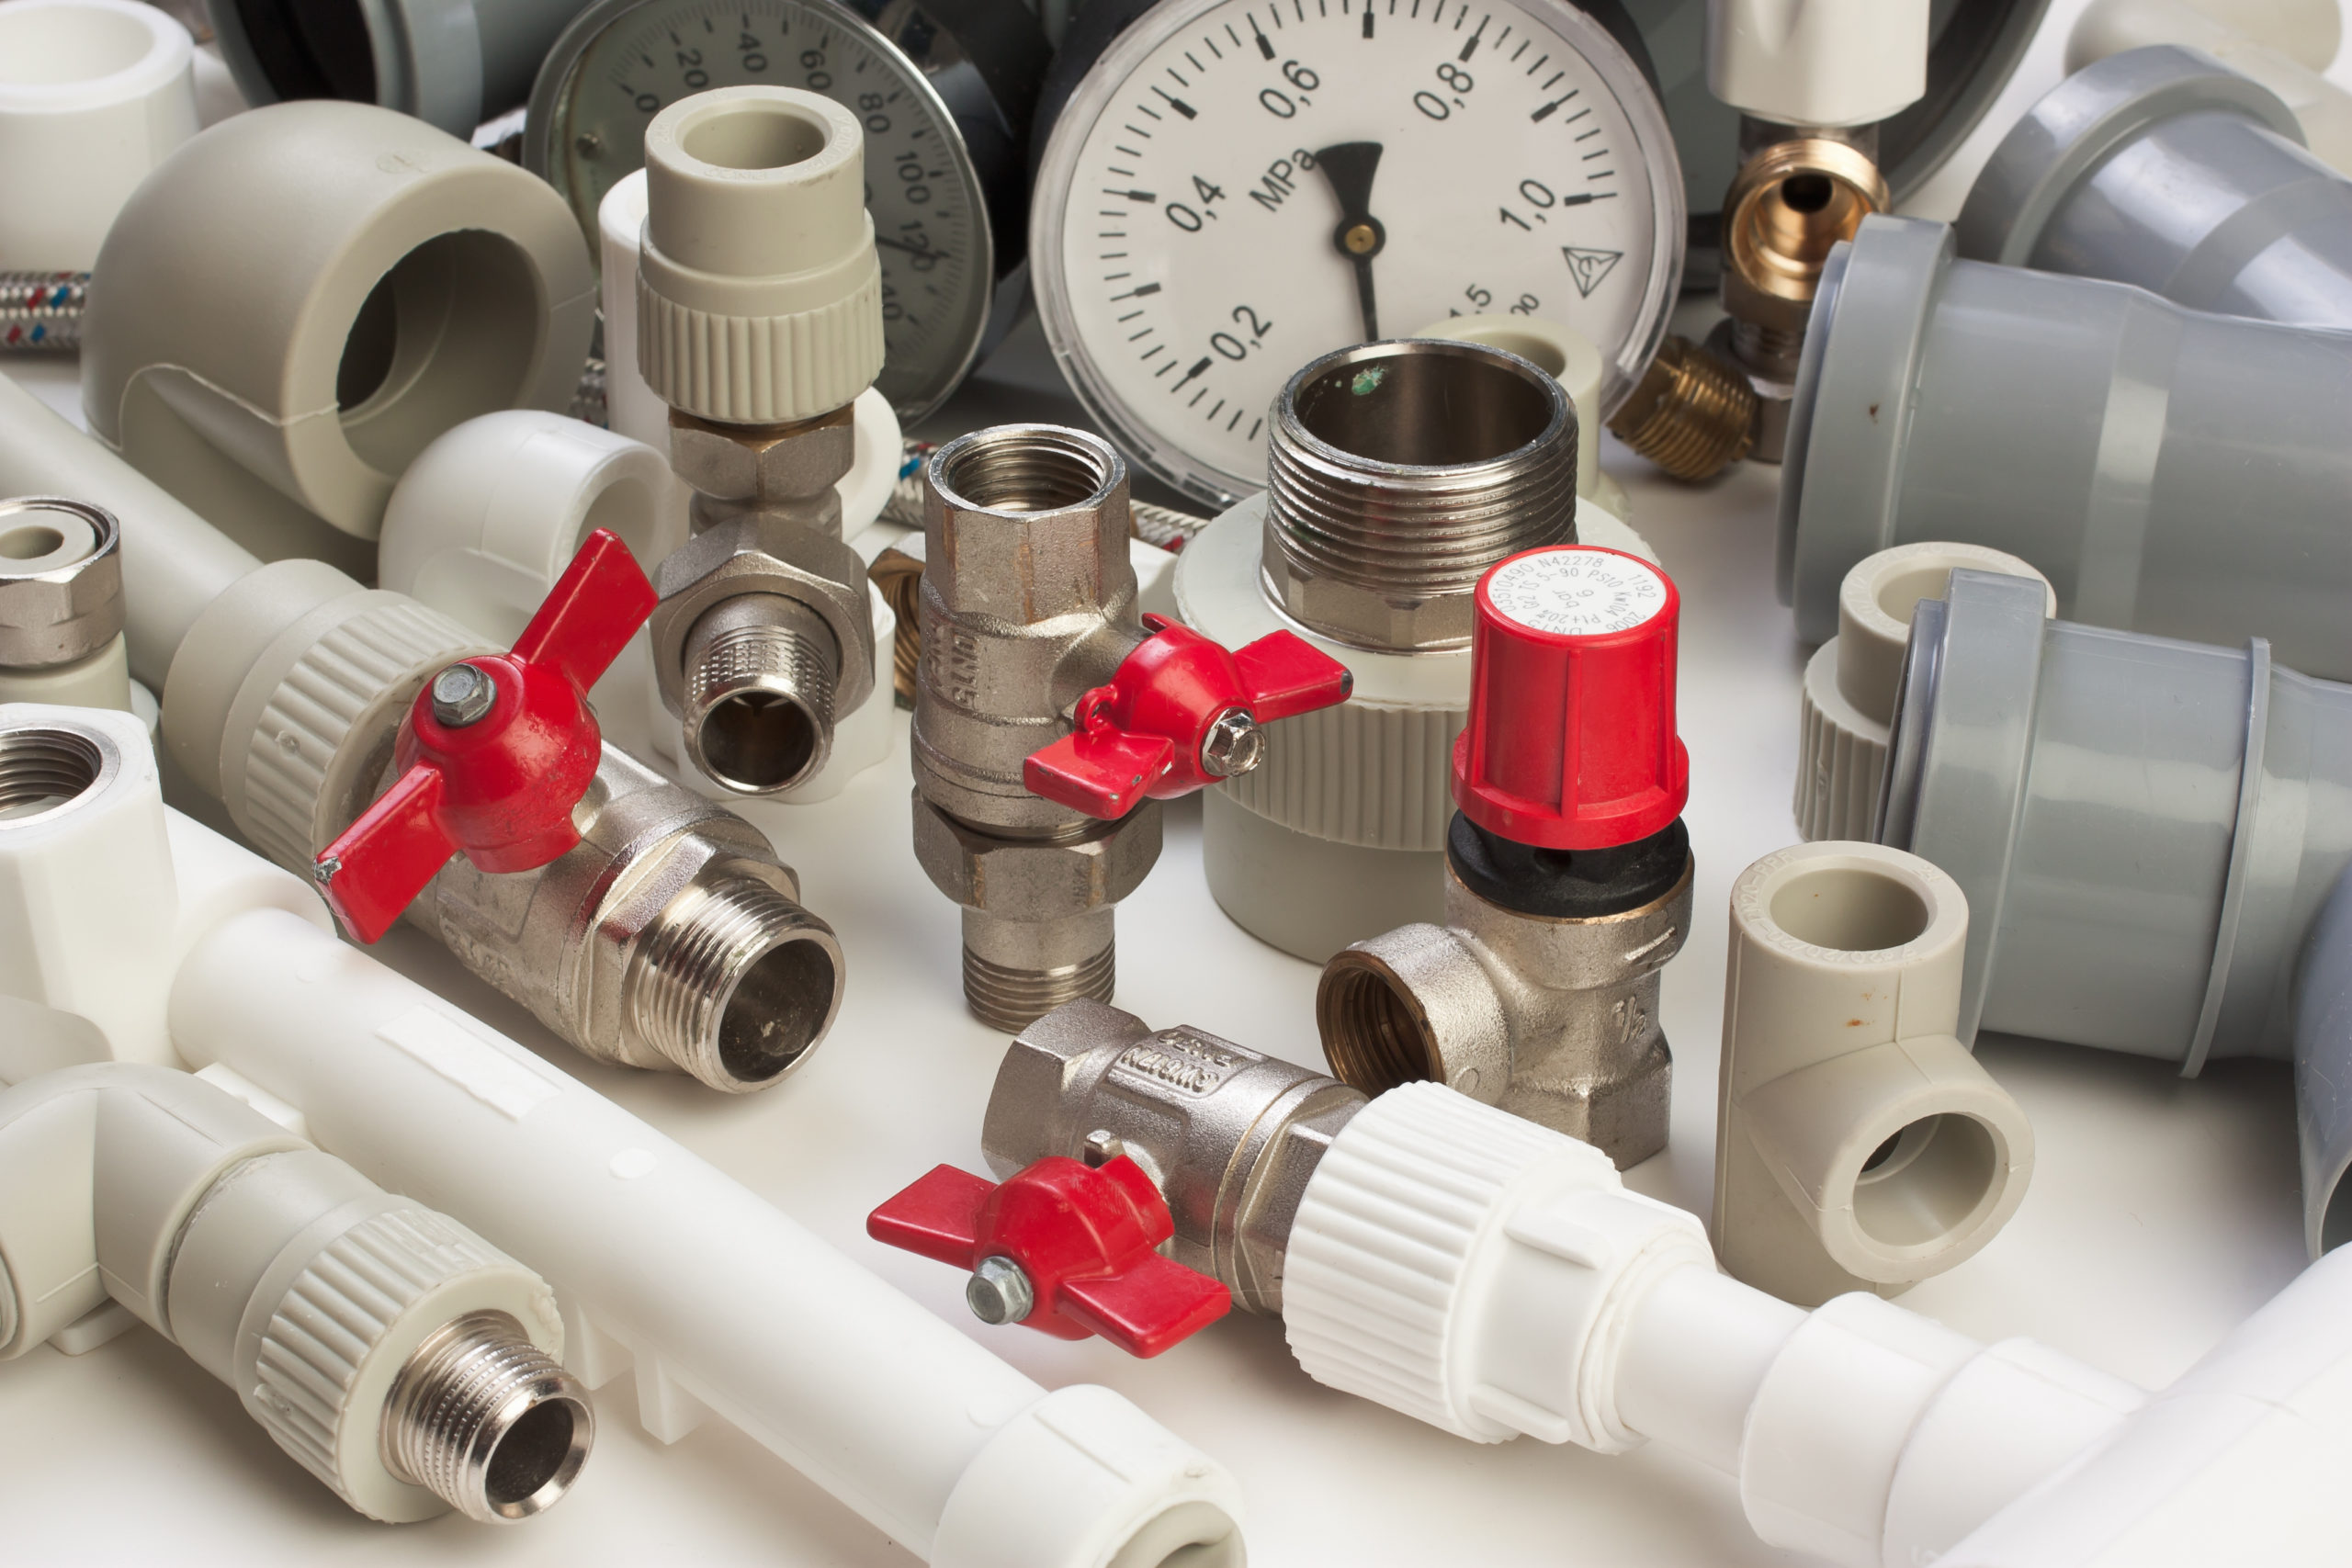 Plumbing fixtures and piping parts